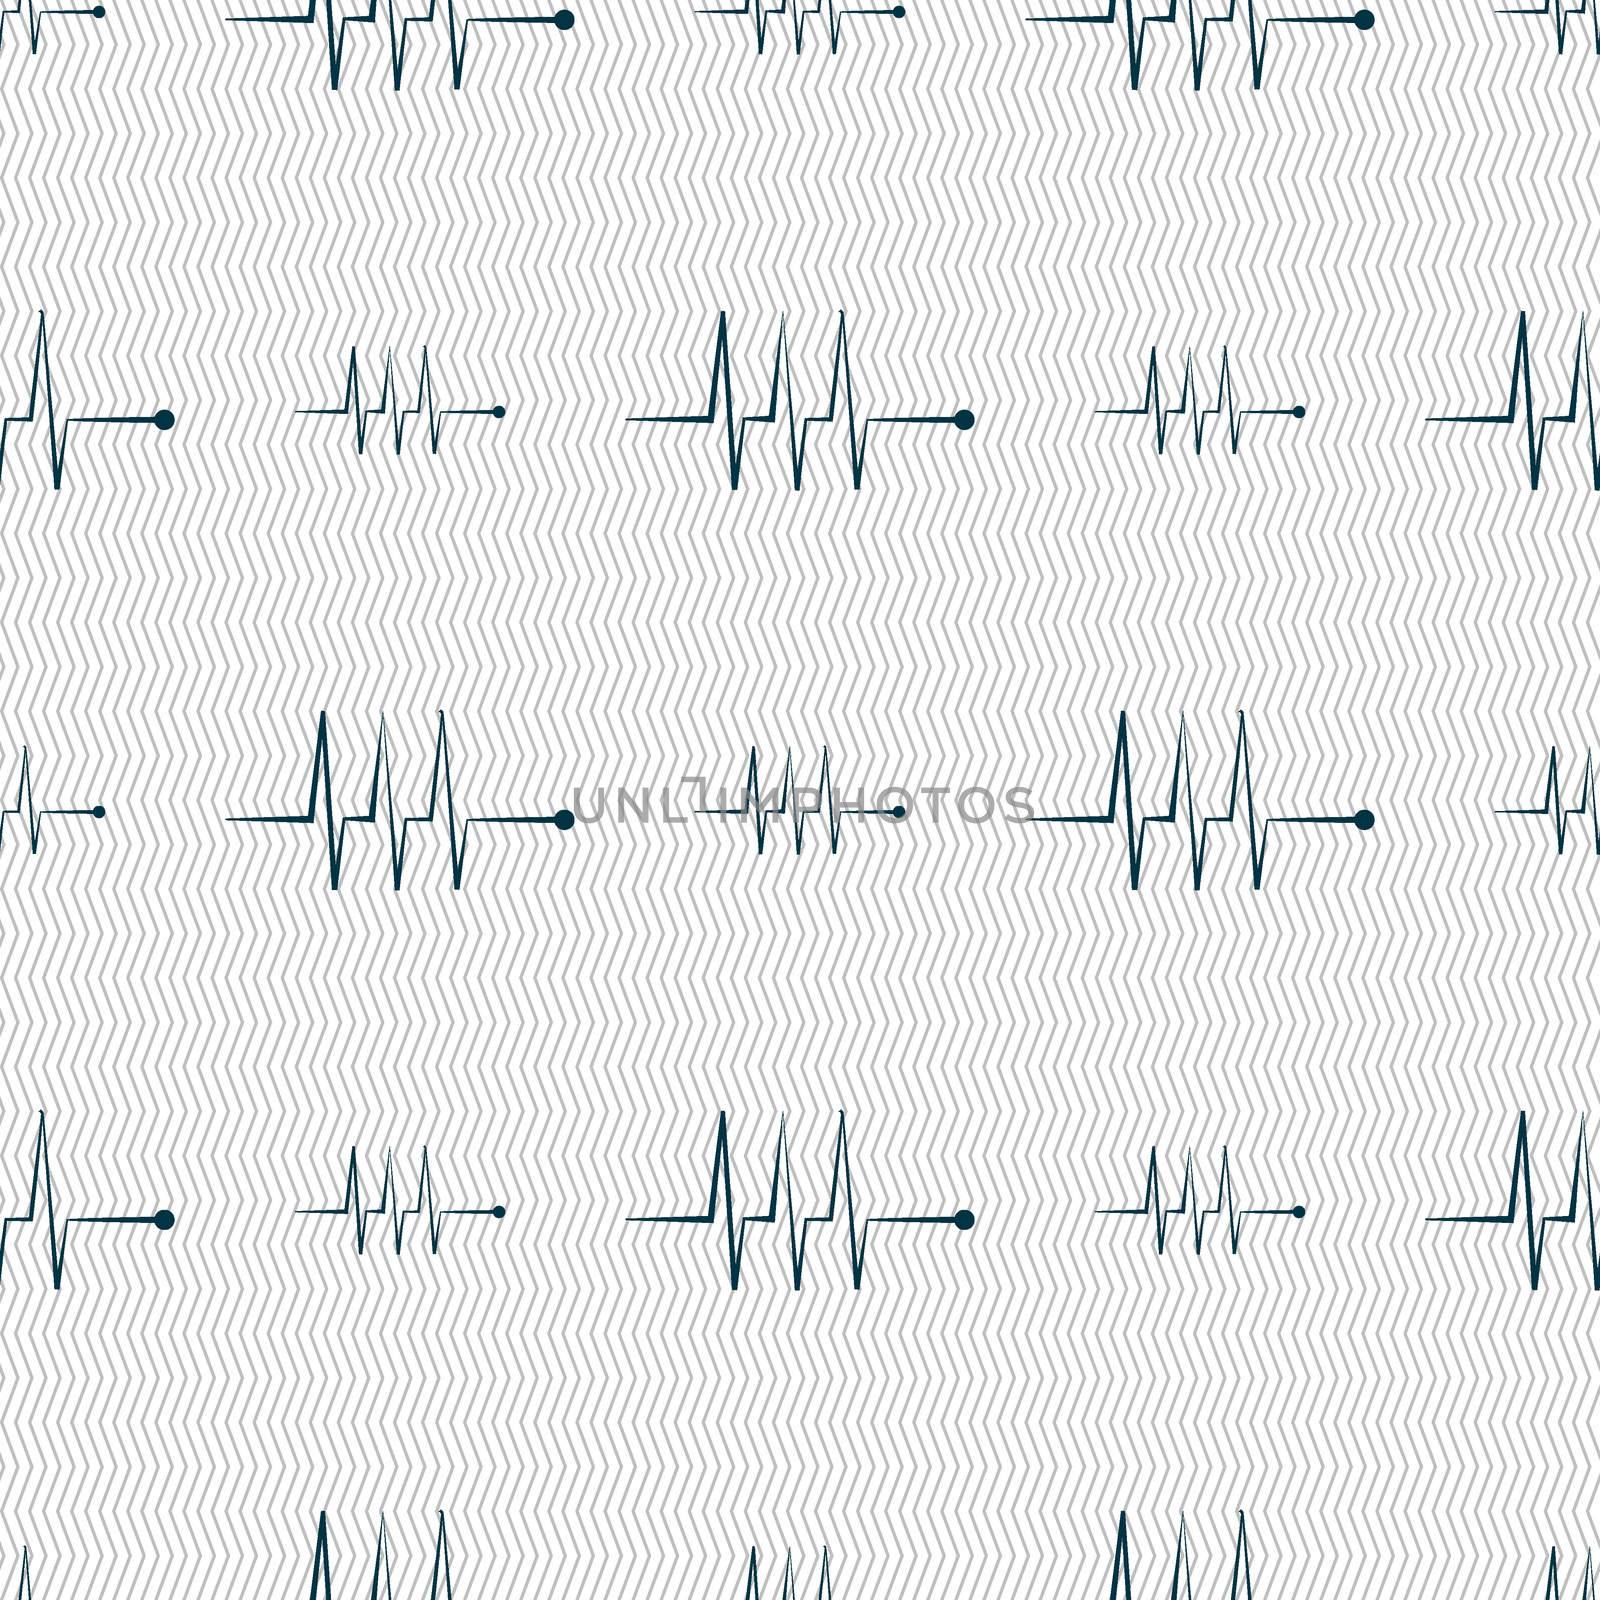 Cardiogram monitoring sign icon. Heart beats symbol. Seamless abstract background with geometric shapes.  by serhii_lohvyniuk